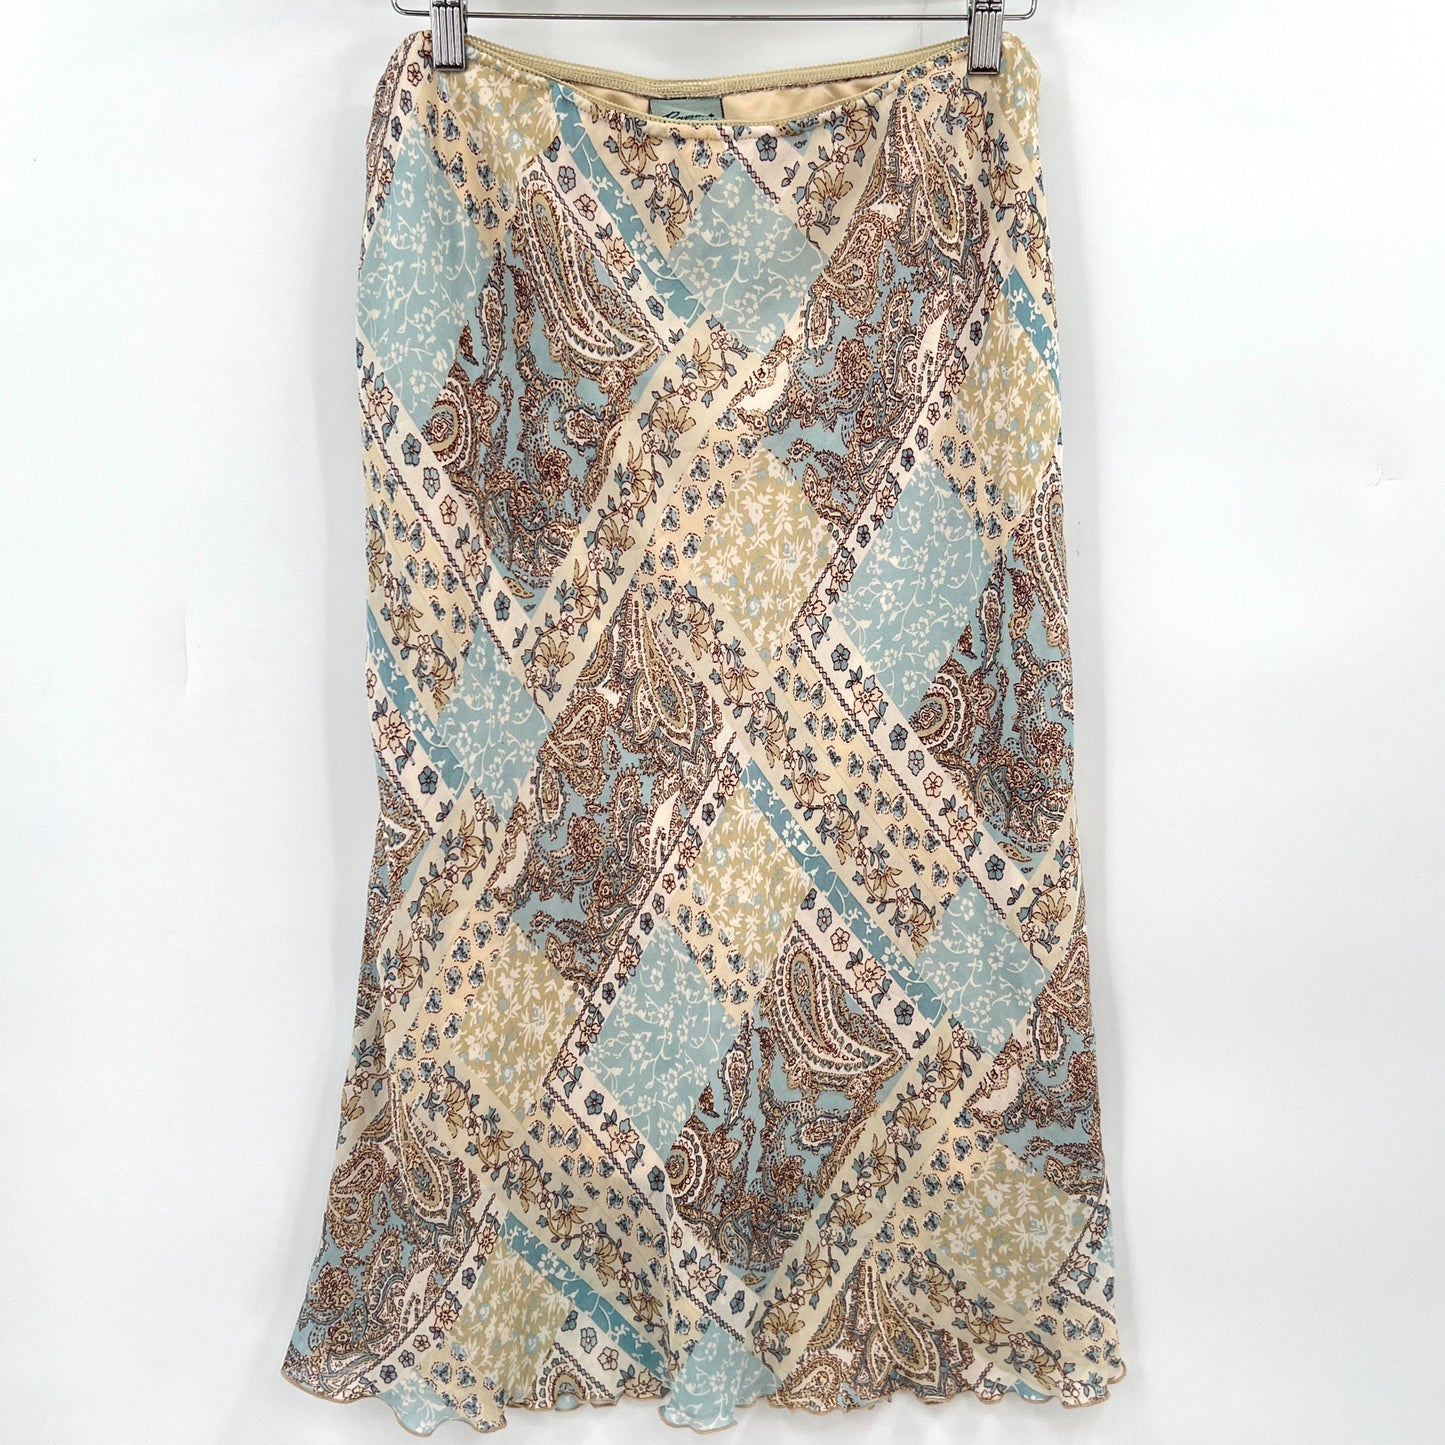 SOLD. Y2K Paisley Patch Like Skirt M/L